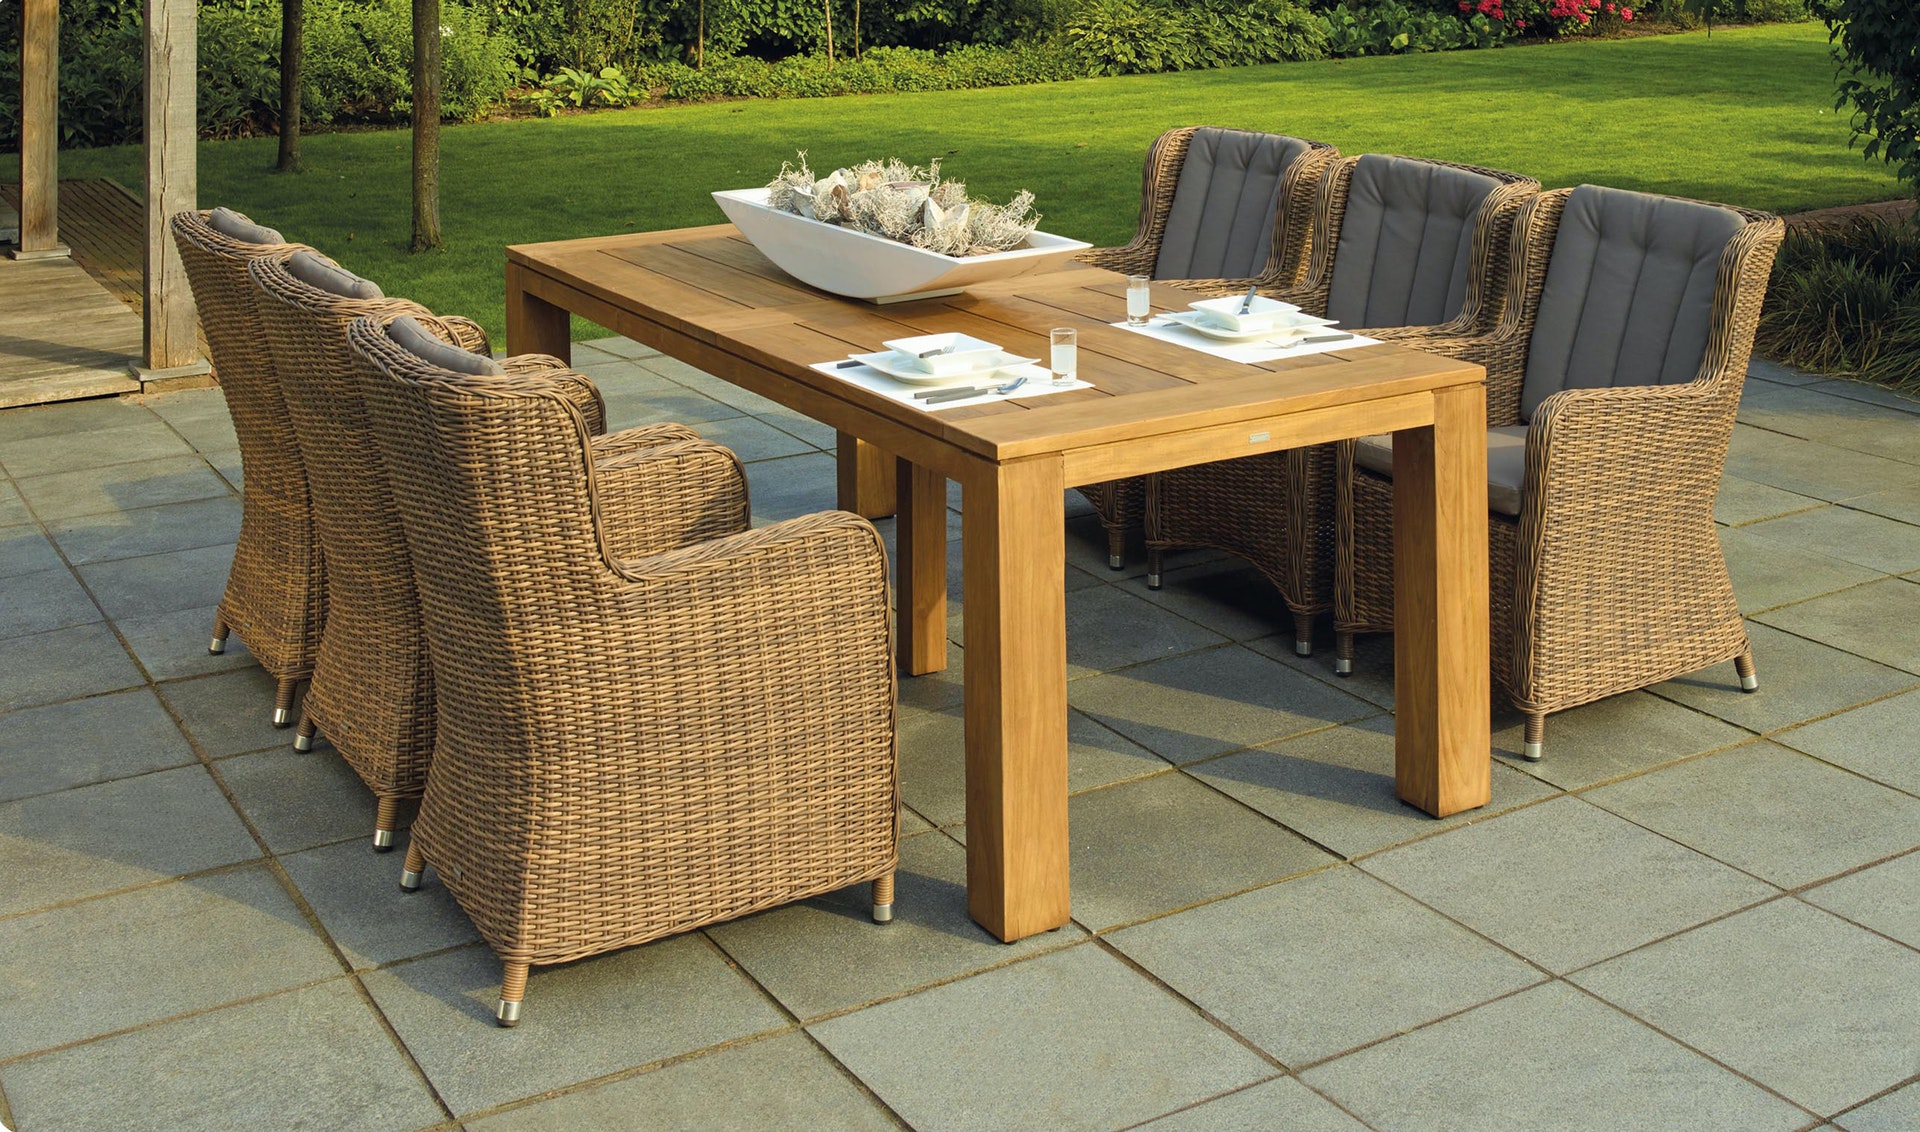 7 Tips For Arranging Patio Furniture